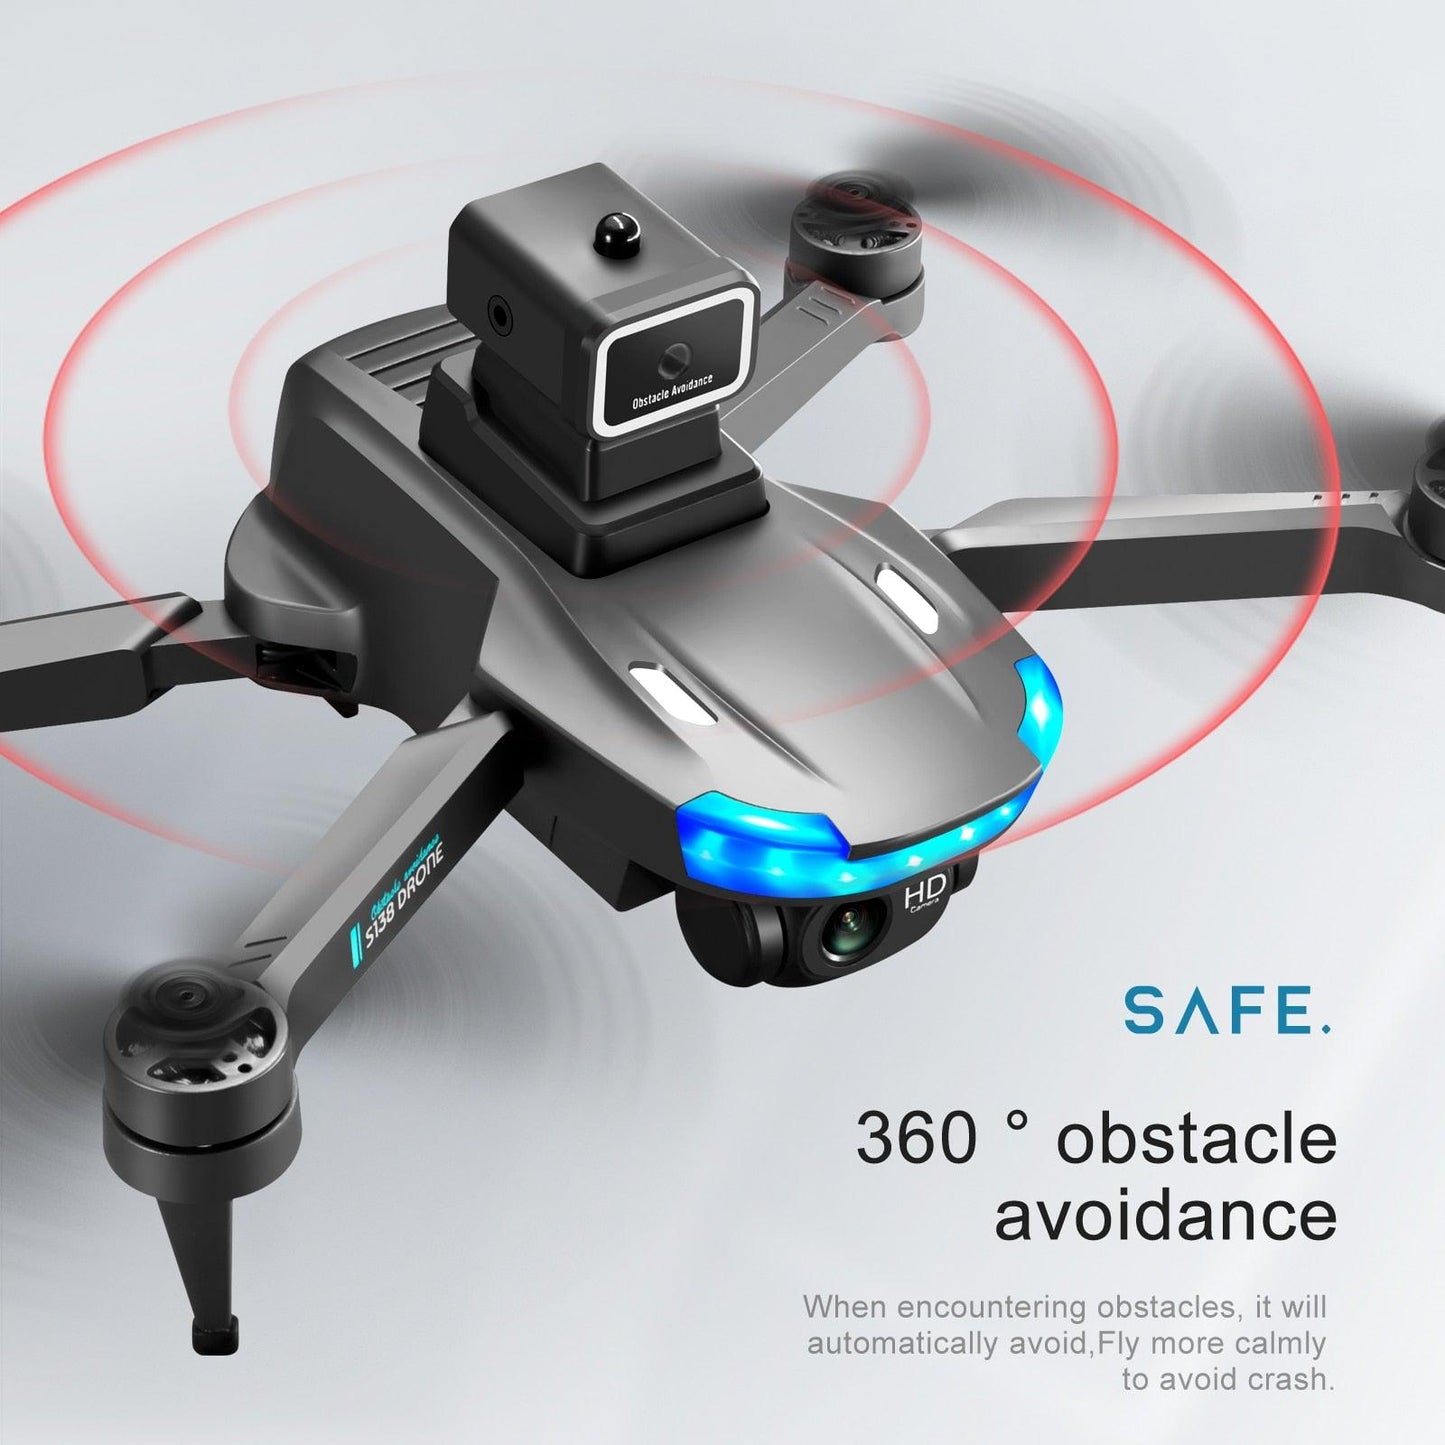 S138 Drone - GPS 8K Professional Dual Camera 5G Wifi FPV Obstacle Avoidance Folding Quadcopter Remote Control Distance 3000M Gift Toy - RCDrone